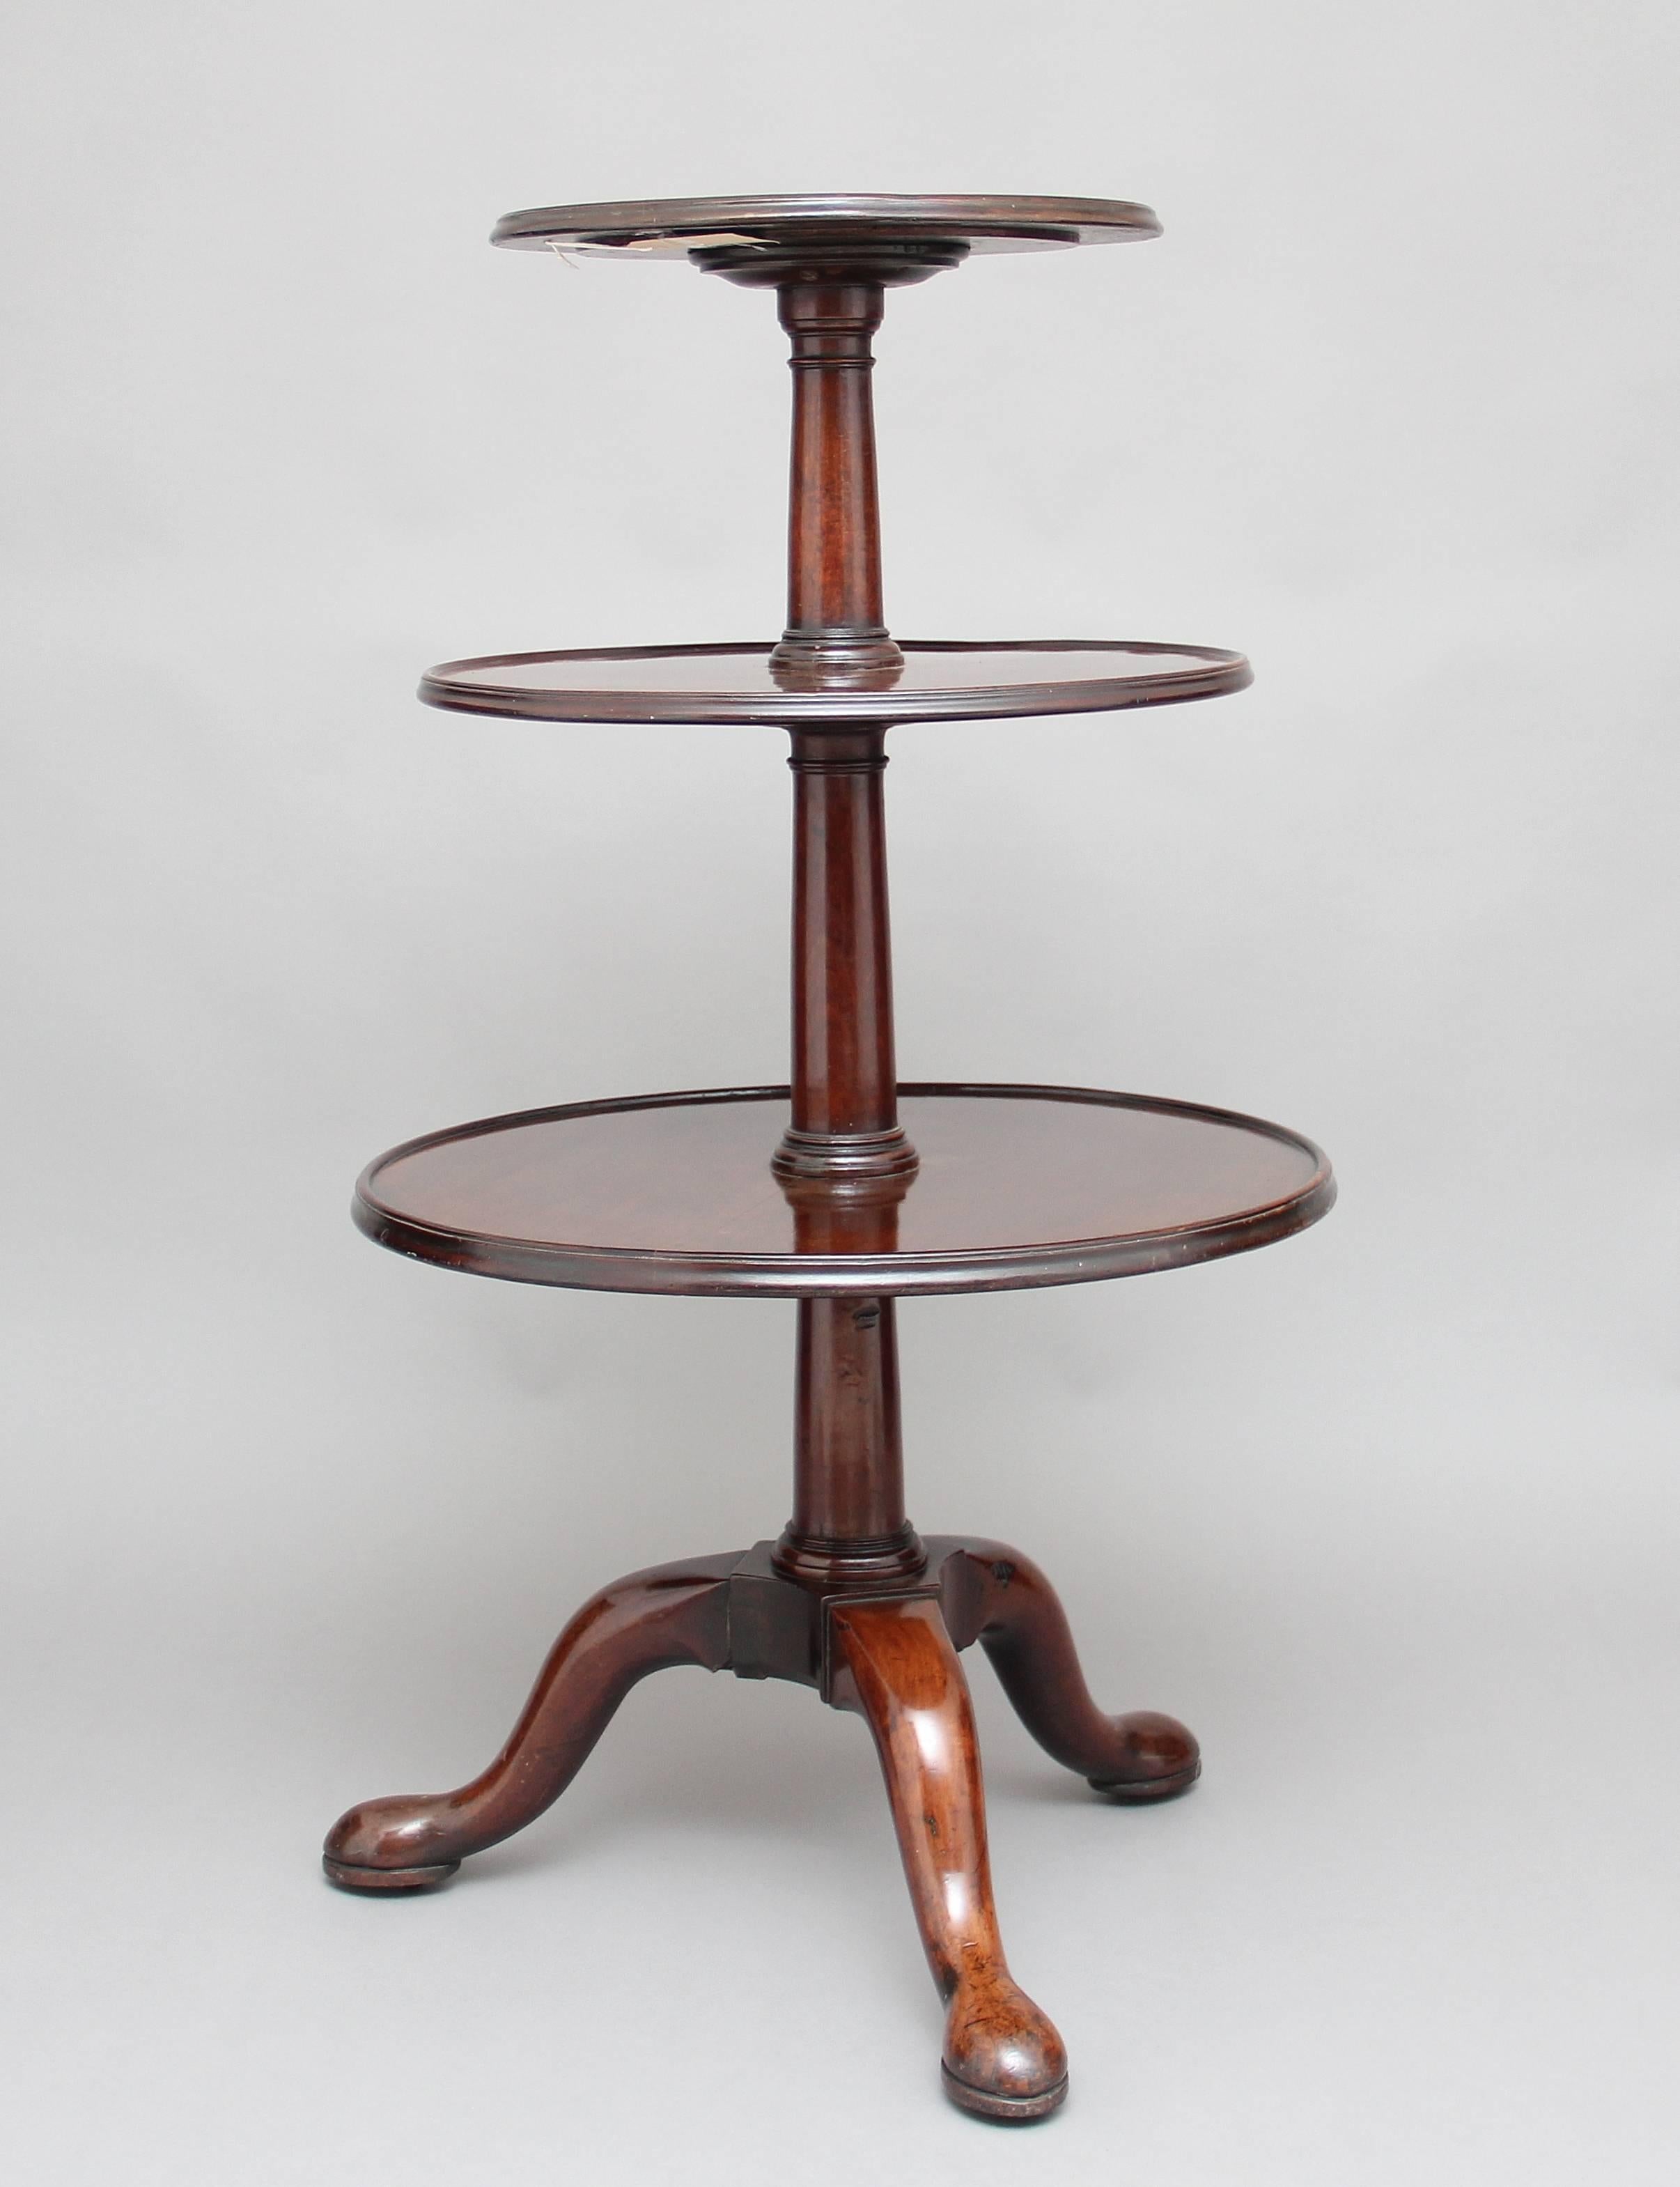 18th century mahogany three tier dumbwaiter, the elegant turned stem supporting three dish tops of various sizes standing on three cabriole legs ending with a pad foot, circa 1770.
 